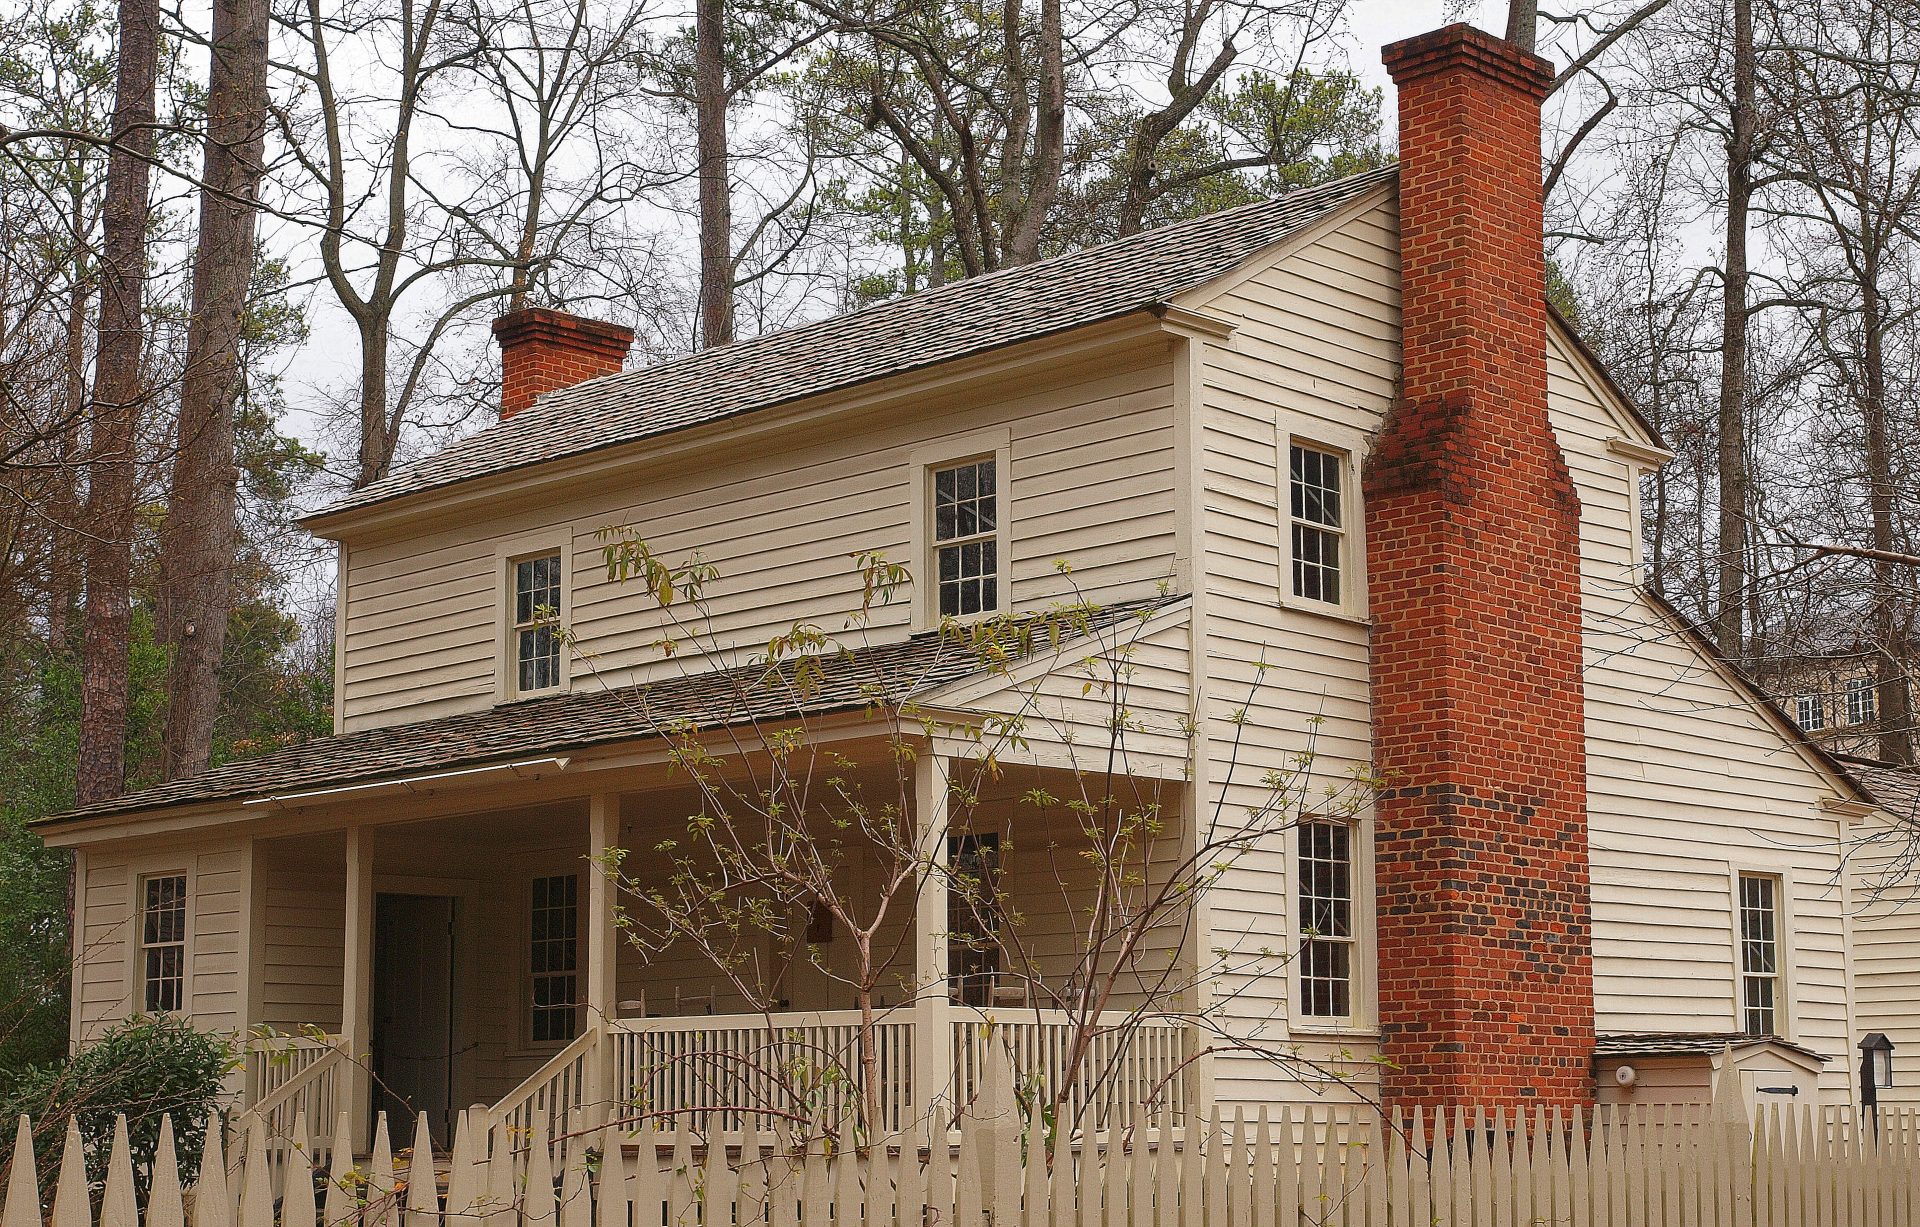 A photo of the Tullie Smith House in the Atlanta History Center, a wood plank sided two story house with a brick chimney.